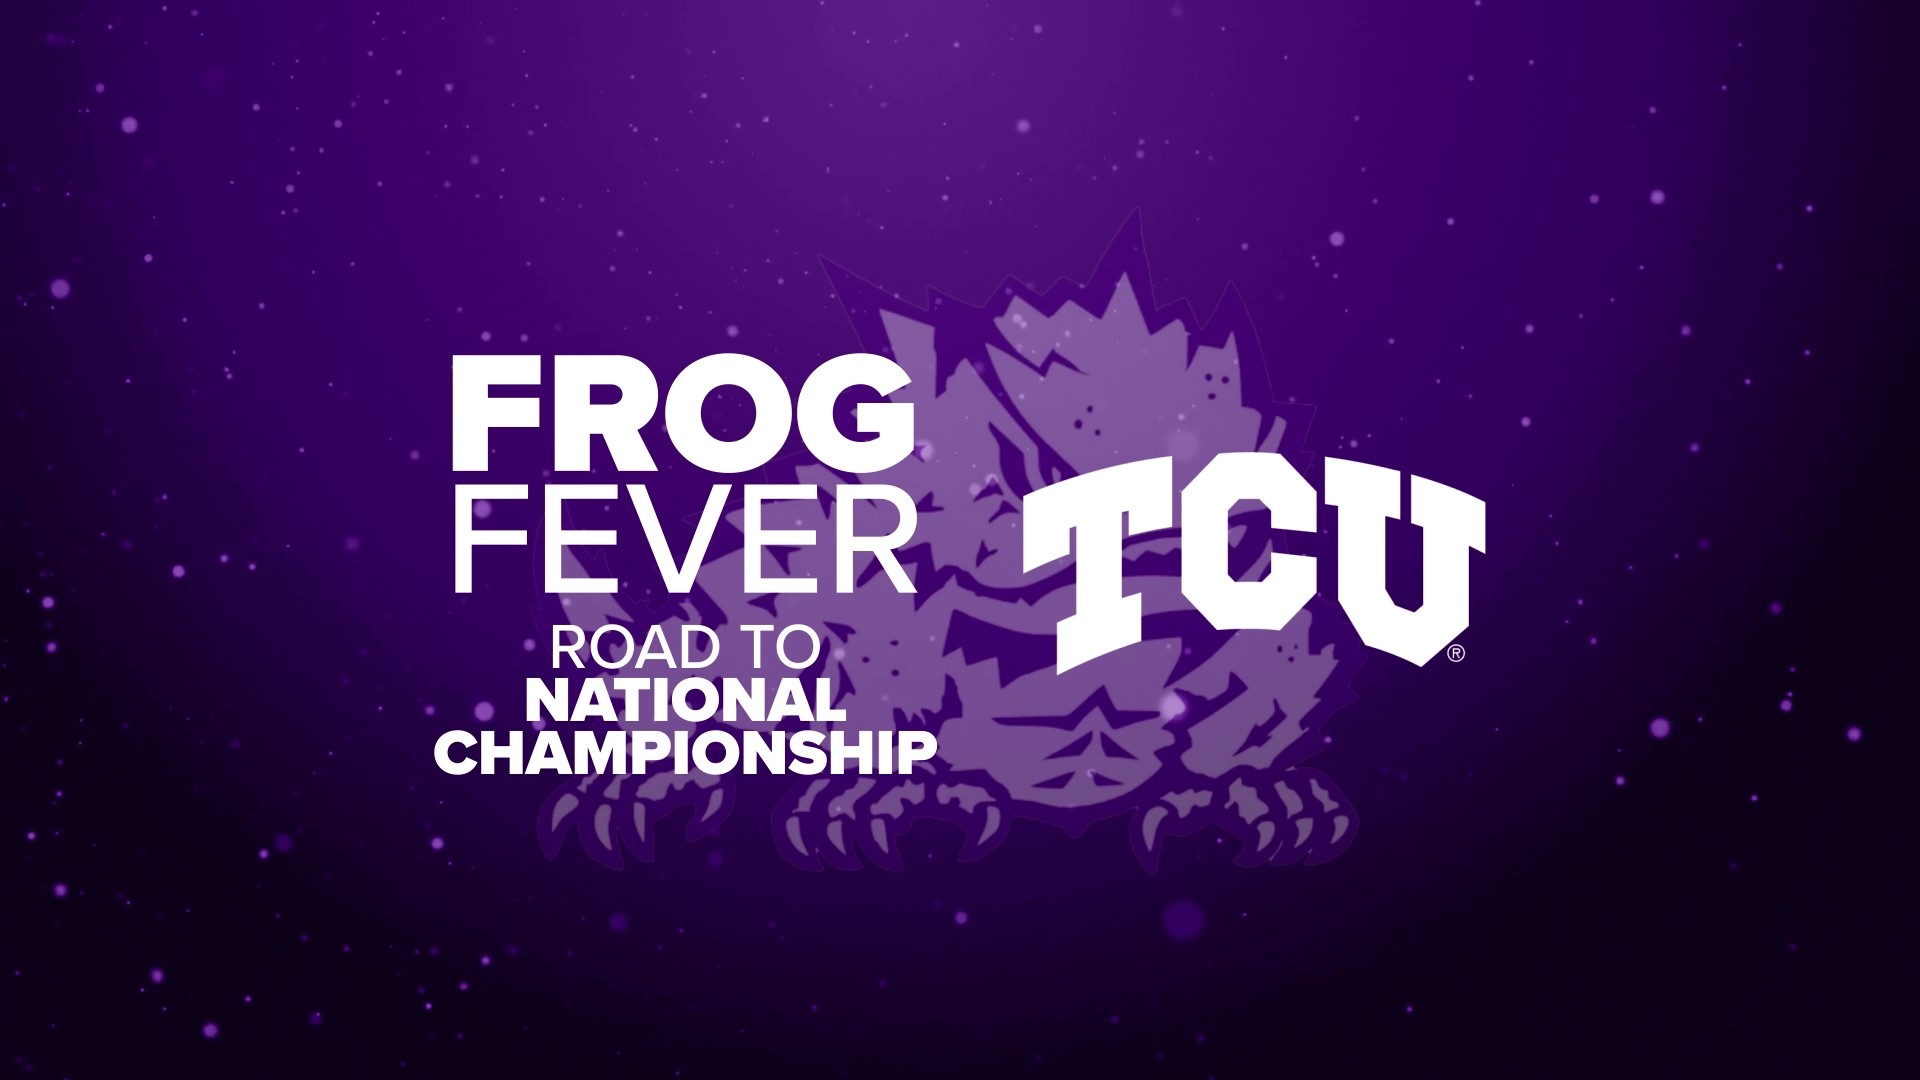 WFAA's Ariel Plasencia hosts a special look at the excitement surrounding TCU's march to the college football national championship.